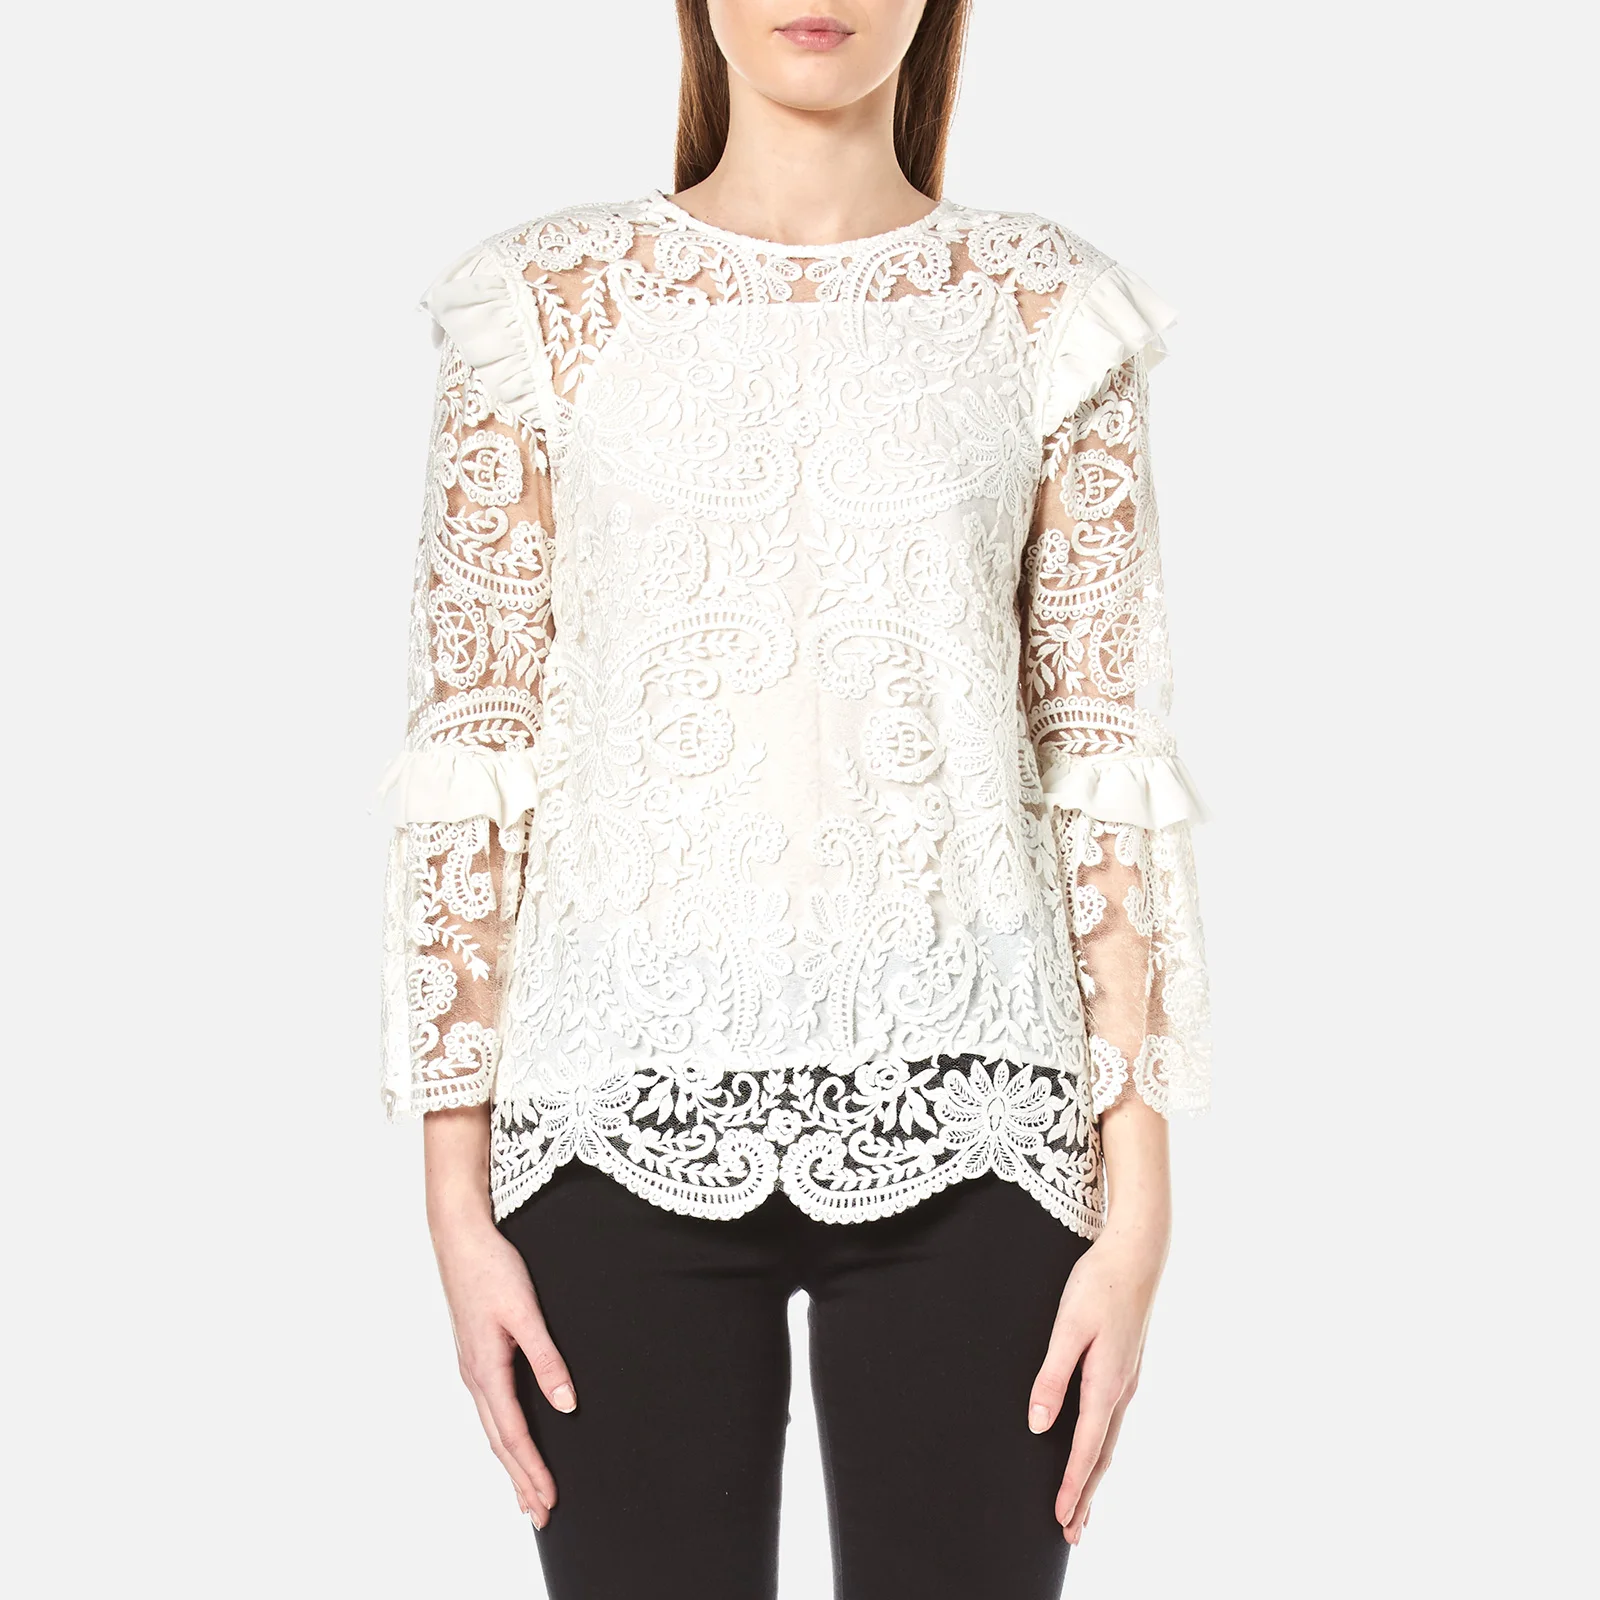 Perseverance Women's Rose Embroidery Lace Tie Back Blouse - Off White Image 1